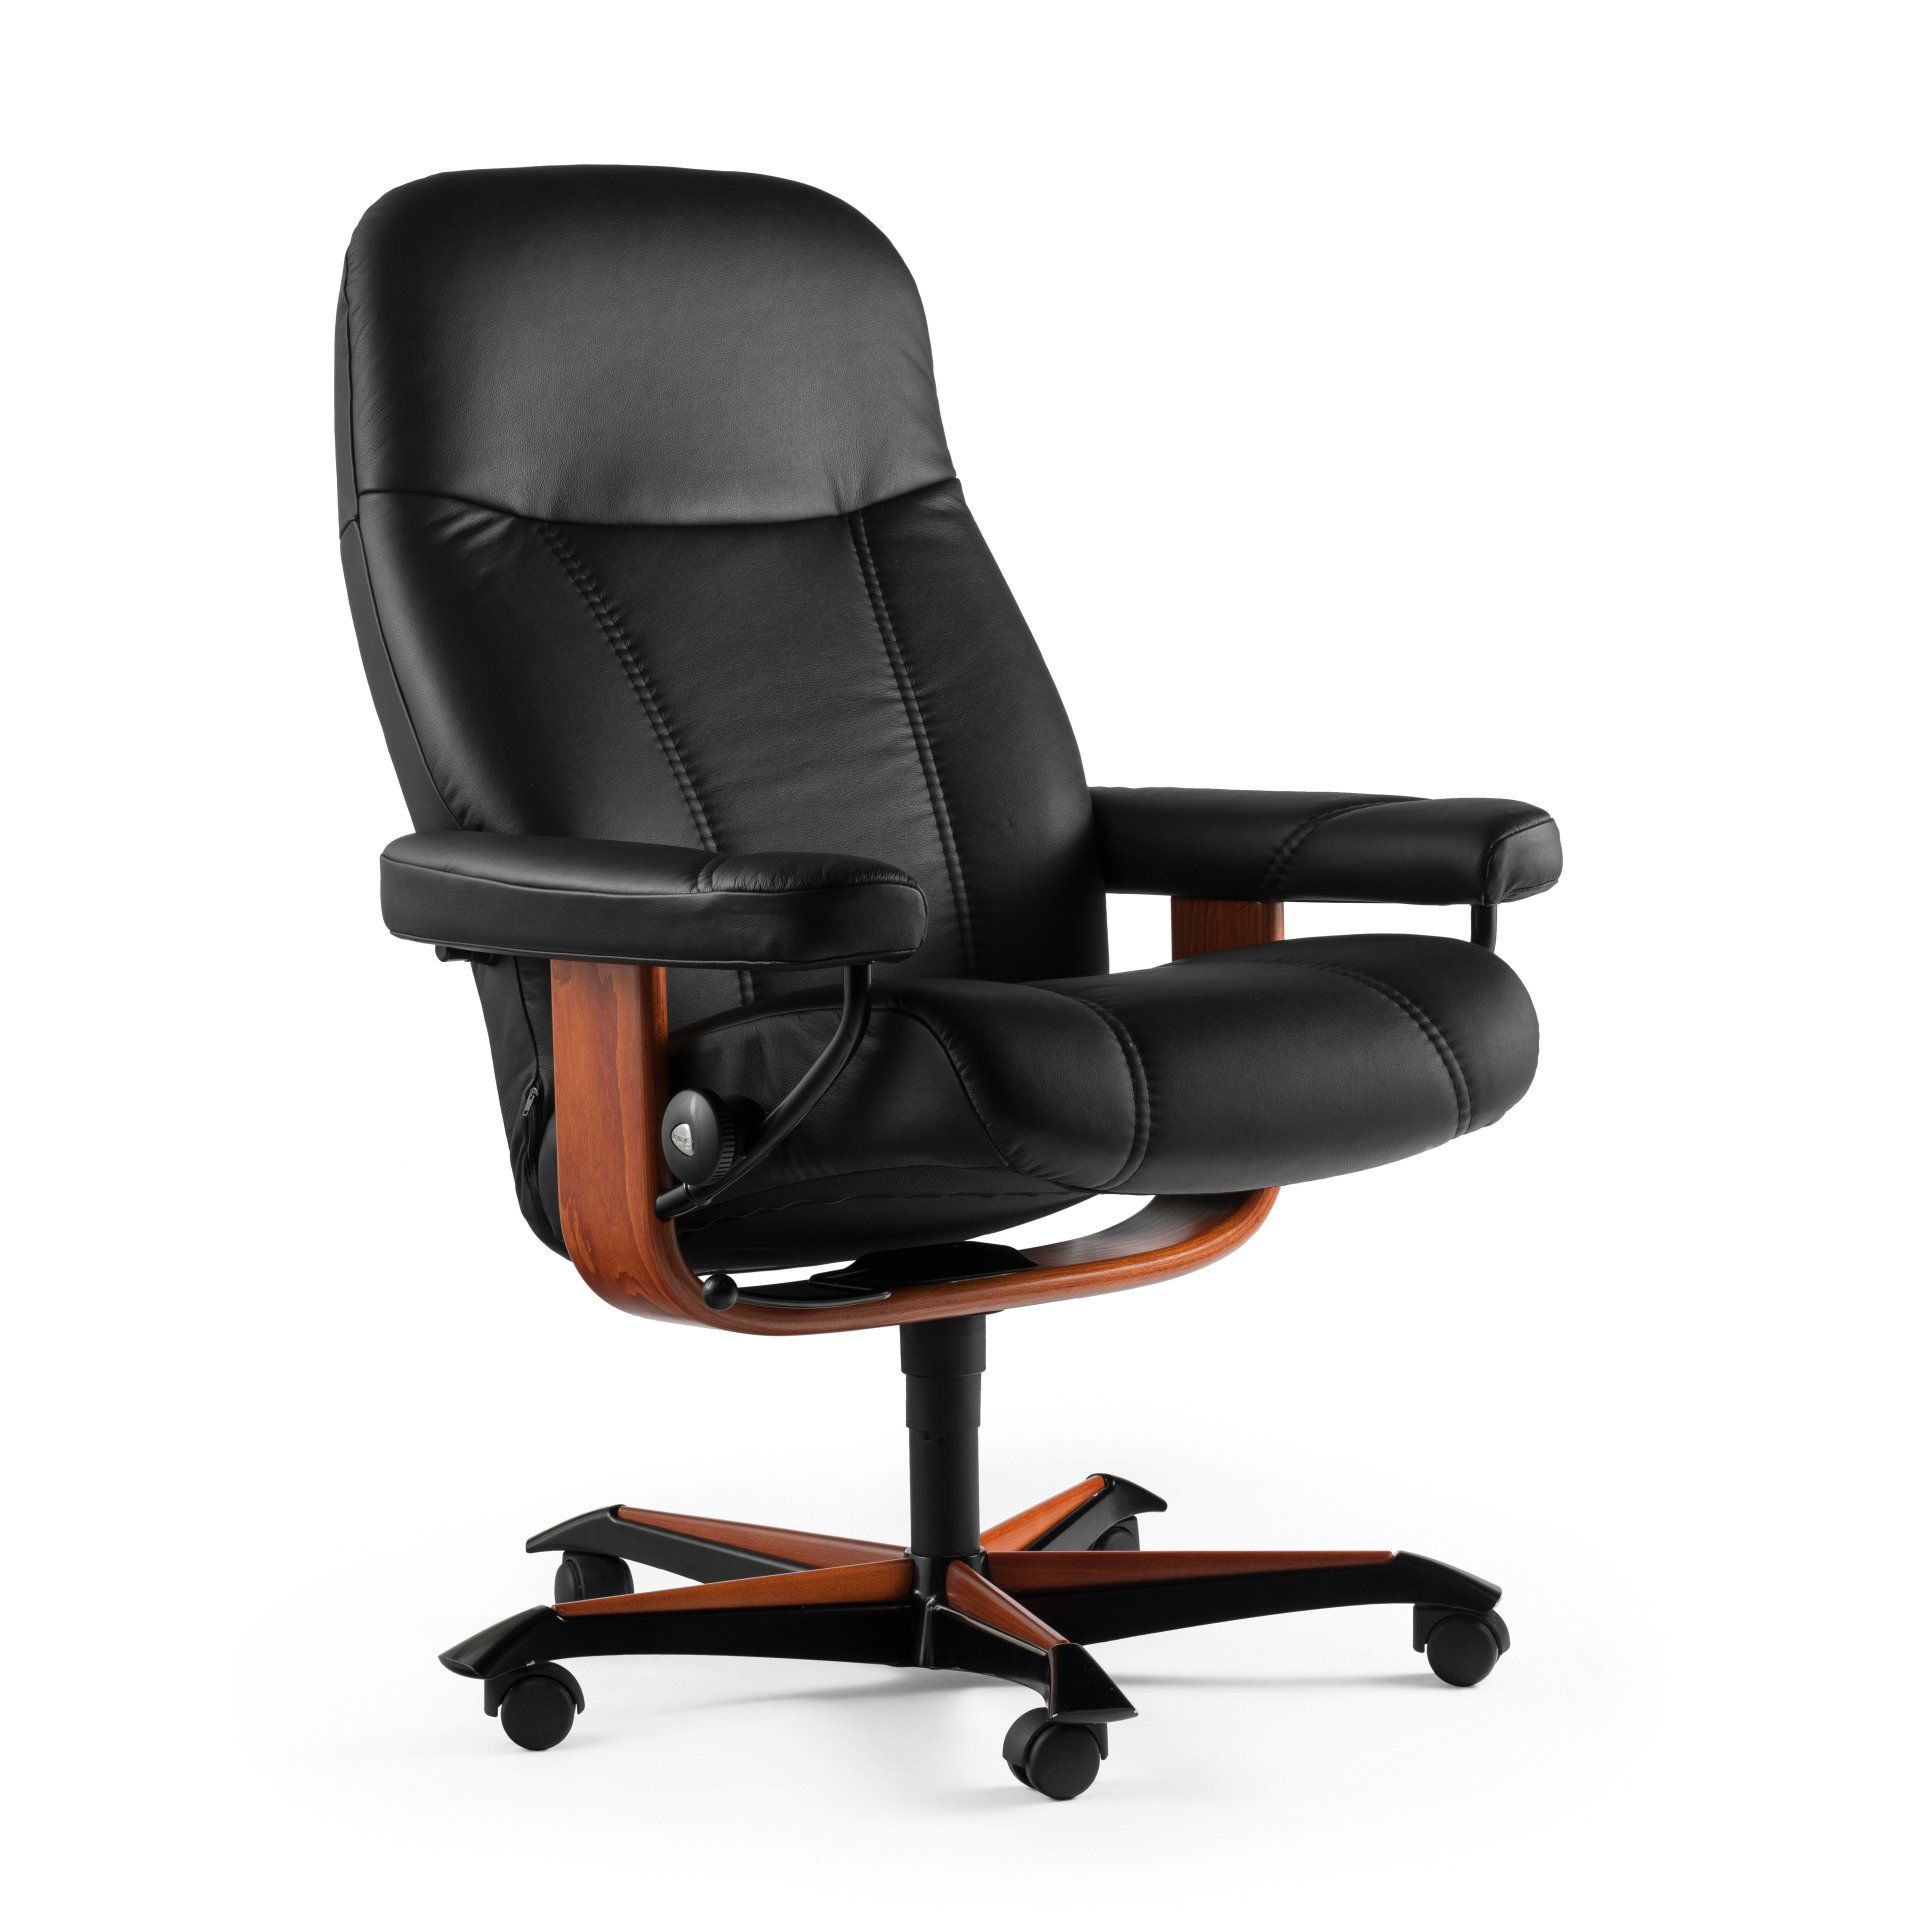 Stressless® Consul Executive office Chair